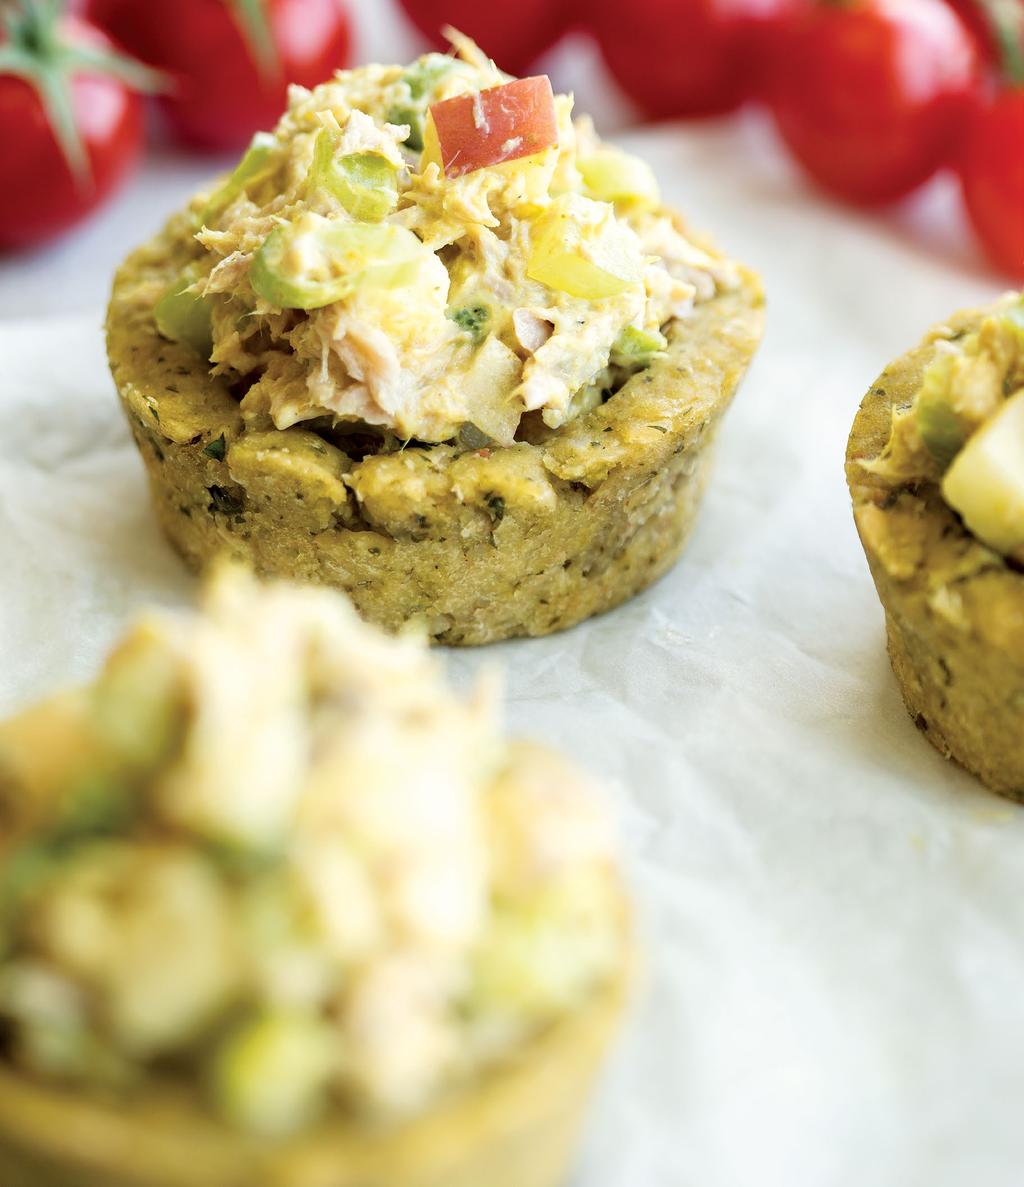 Tuna Salad Bean Cups SERVES 6 Why settle for the same old tuna salad sandwich when serving the salad in bean cups adds fun back into lunch?